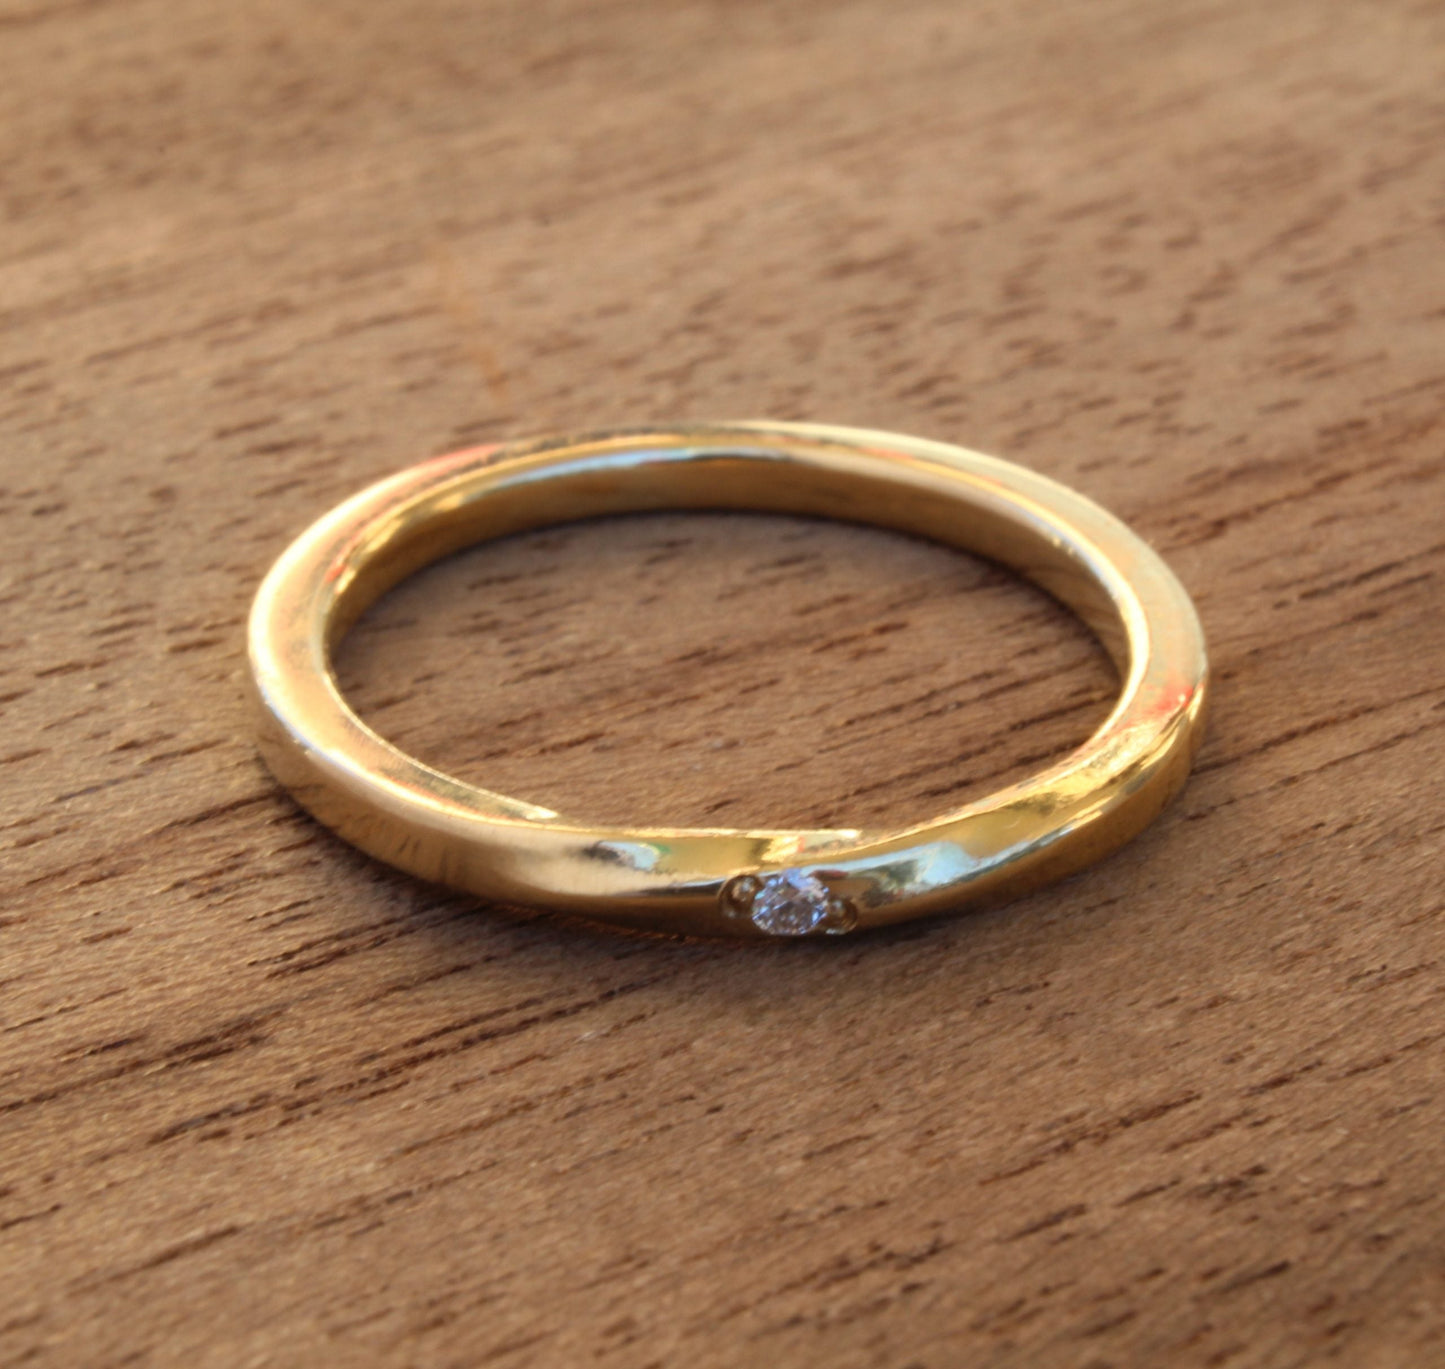 Twisted band 18ct Yellow Gold Ring with a grain set Diamond